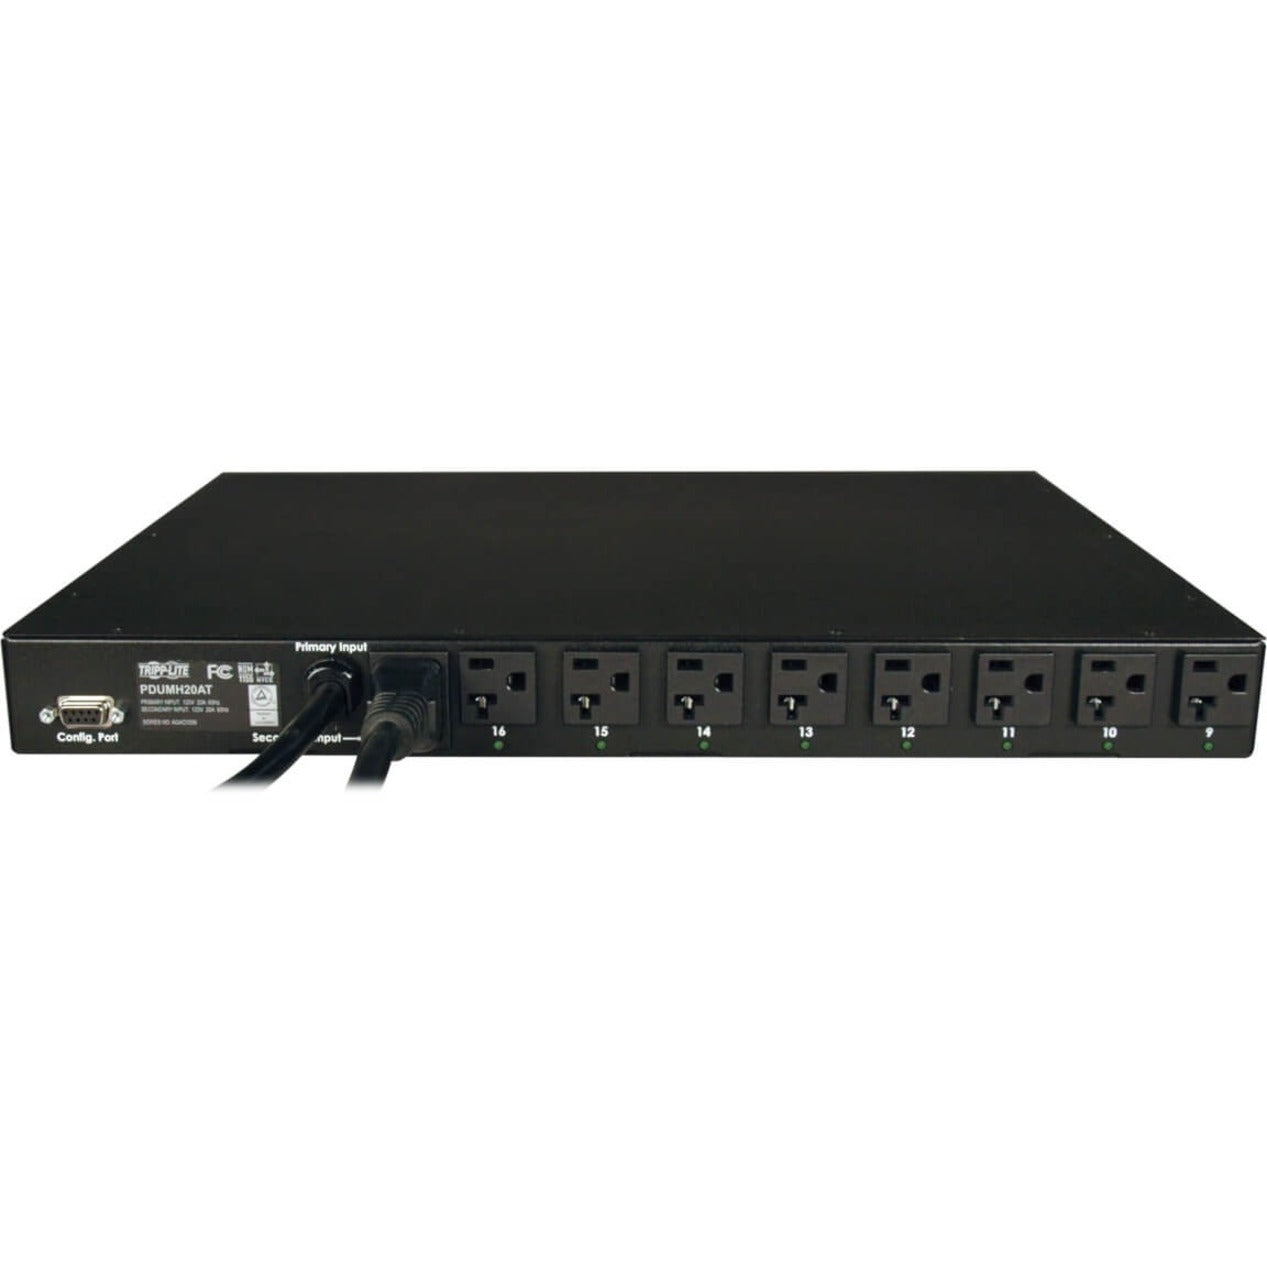 Tripp Lite PDUMH20AT PDU Metered ATS 120V 20A 16 Outlet, Dual UPS Protection, Remote Outlet Control